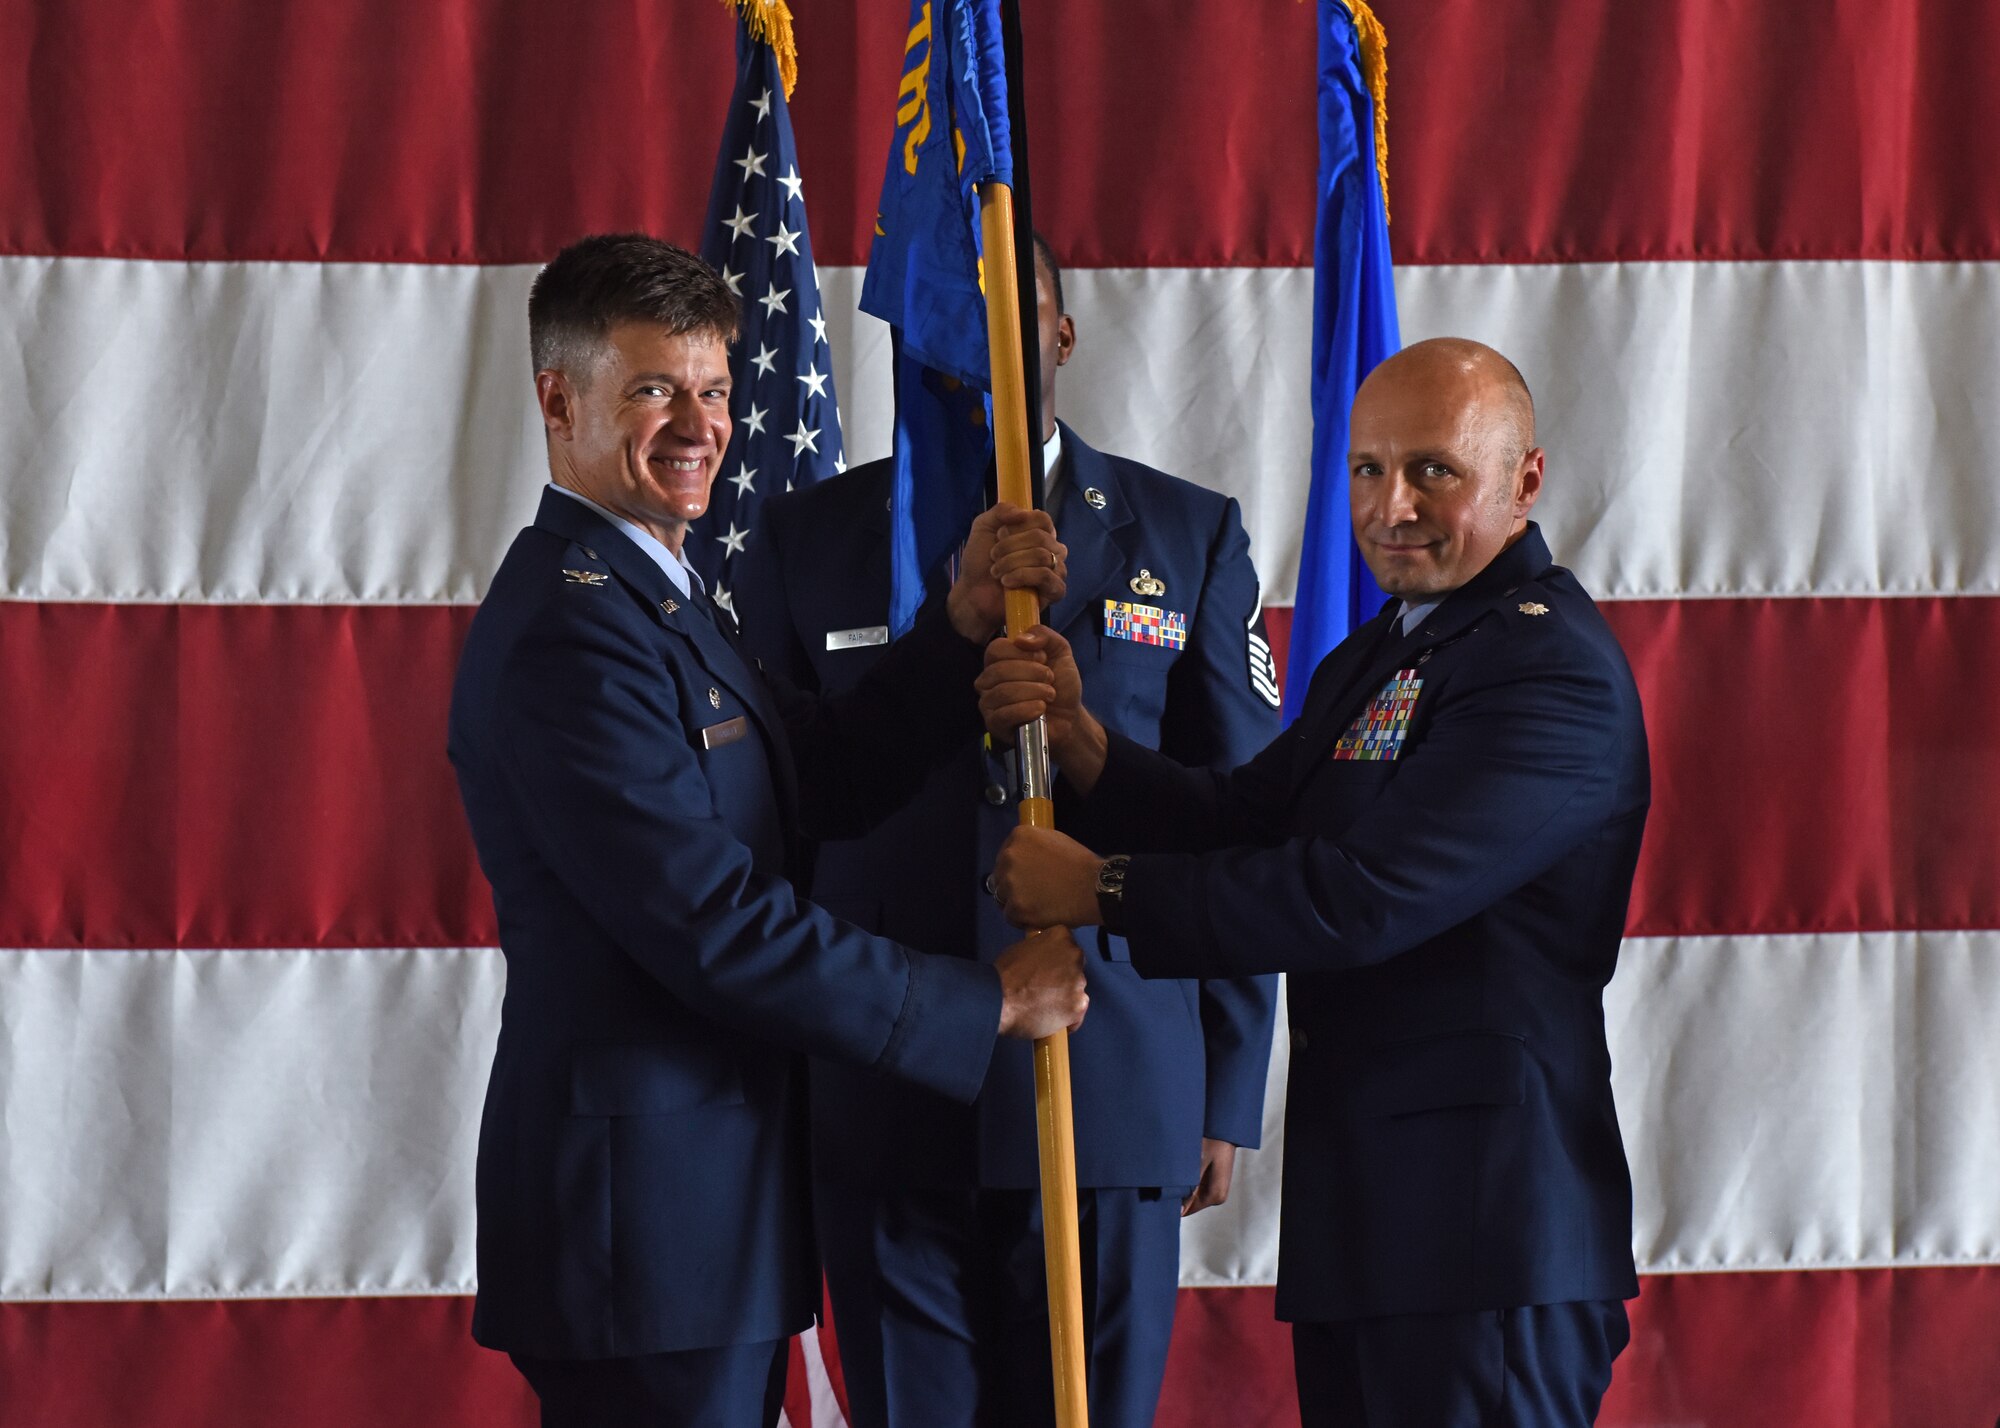 U.S. Air Force Col. Thomas Coakley, 17th Training Group commander, passes the guidon to Lt. Col. Christopher Sharp, incoming 316th Training Squadron commander, during the change of command ceremony at the Louis F. Garland Department of Defense Fire Academy High Bay on Goodfellow Air Force Base, Texas, June 21, 2019. Sharp has served in diverse assignments, such as an instructor here, Information Integration Officer aboard RC-135 V/W Rivet Joint aircraft, Intelligence Weapons Officer supporting U-2, RQ-4 Global Hawk and MC-12 aircraft, and as the Wing Senior Intelligence Officer supporting F-15E Strike Eagle operations. (U.S. Air Force photo by Airman 1st Class Zachary Chapman/Released)